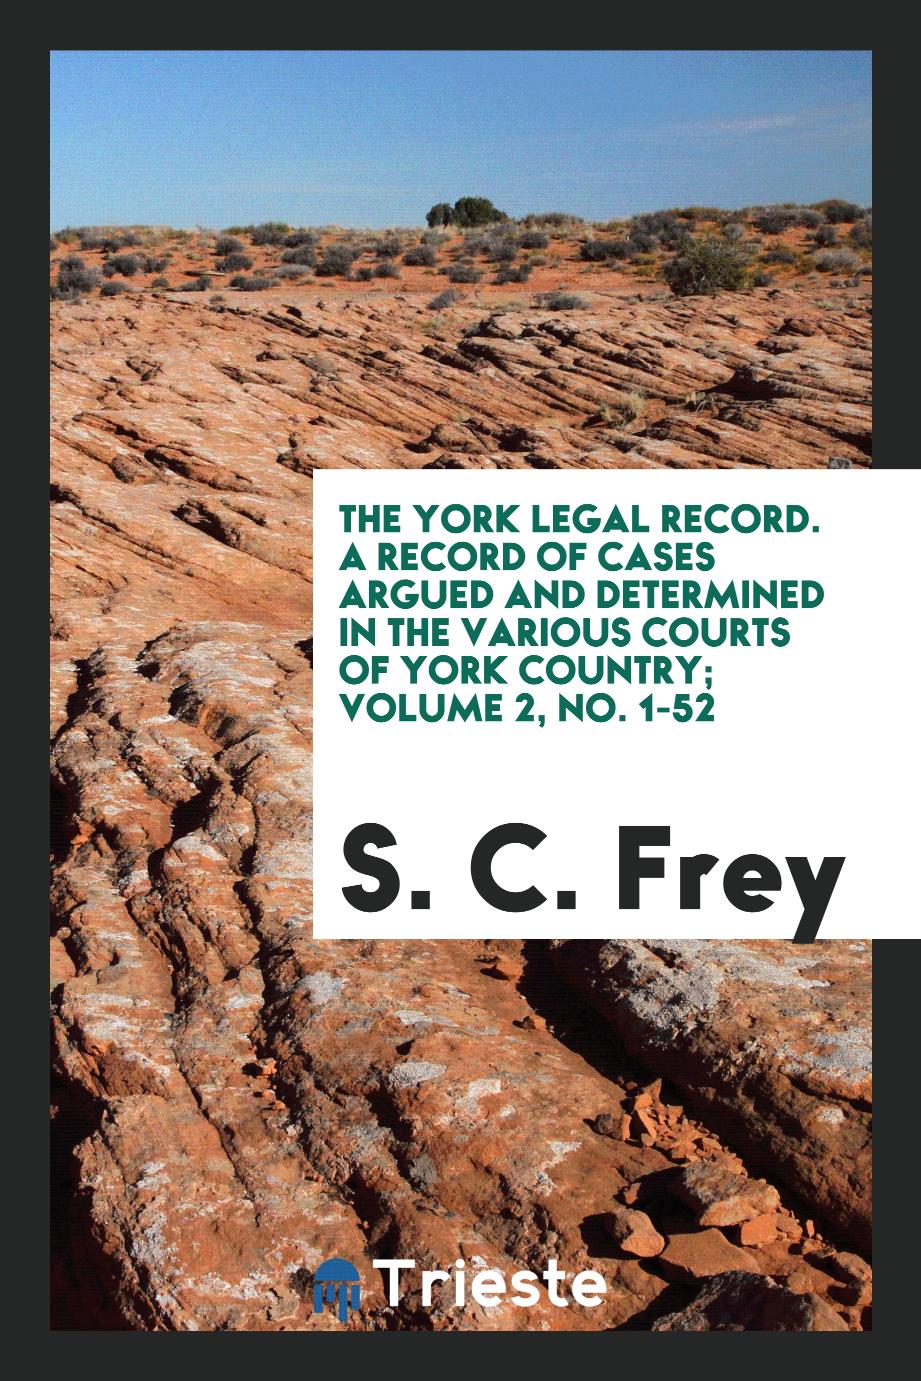 The York Legal Record. A Record of Cases Argued and Determined in the Various Courts of York Country; Volume 2, No. 1-52